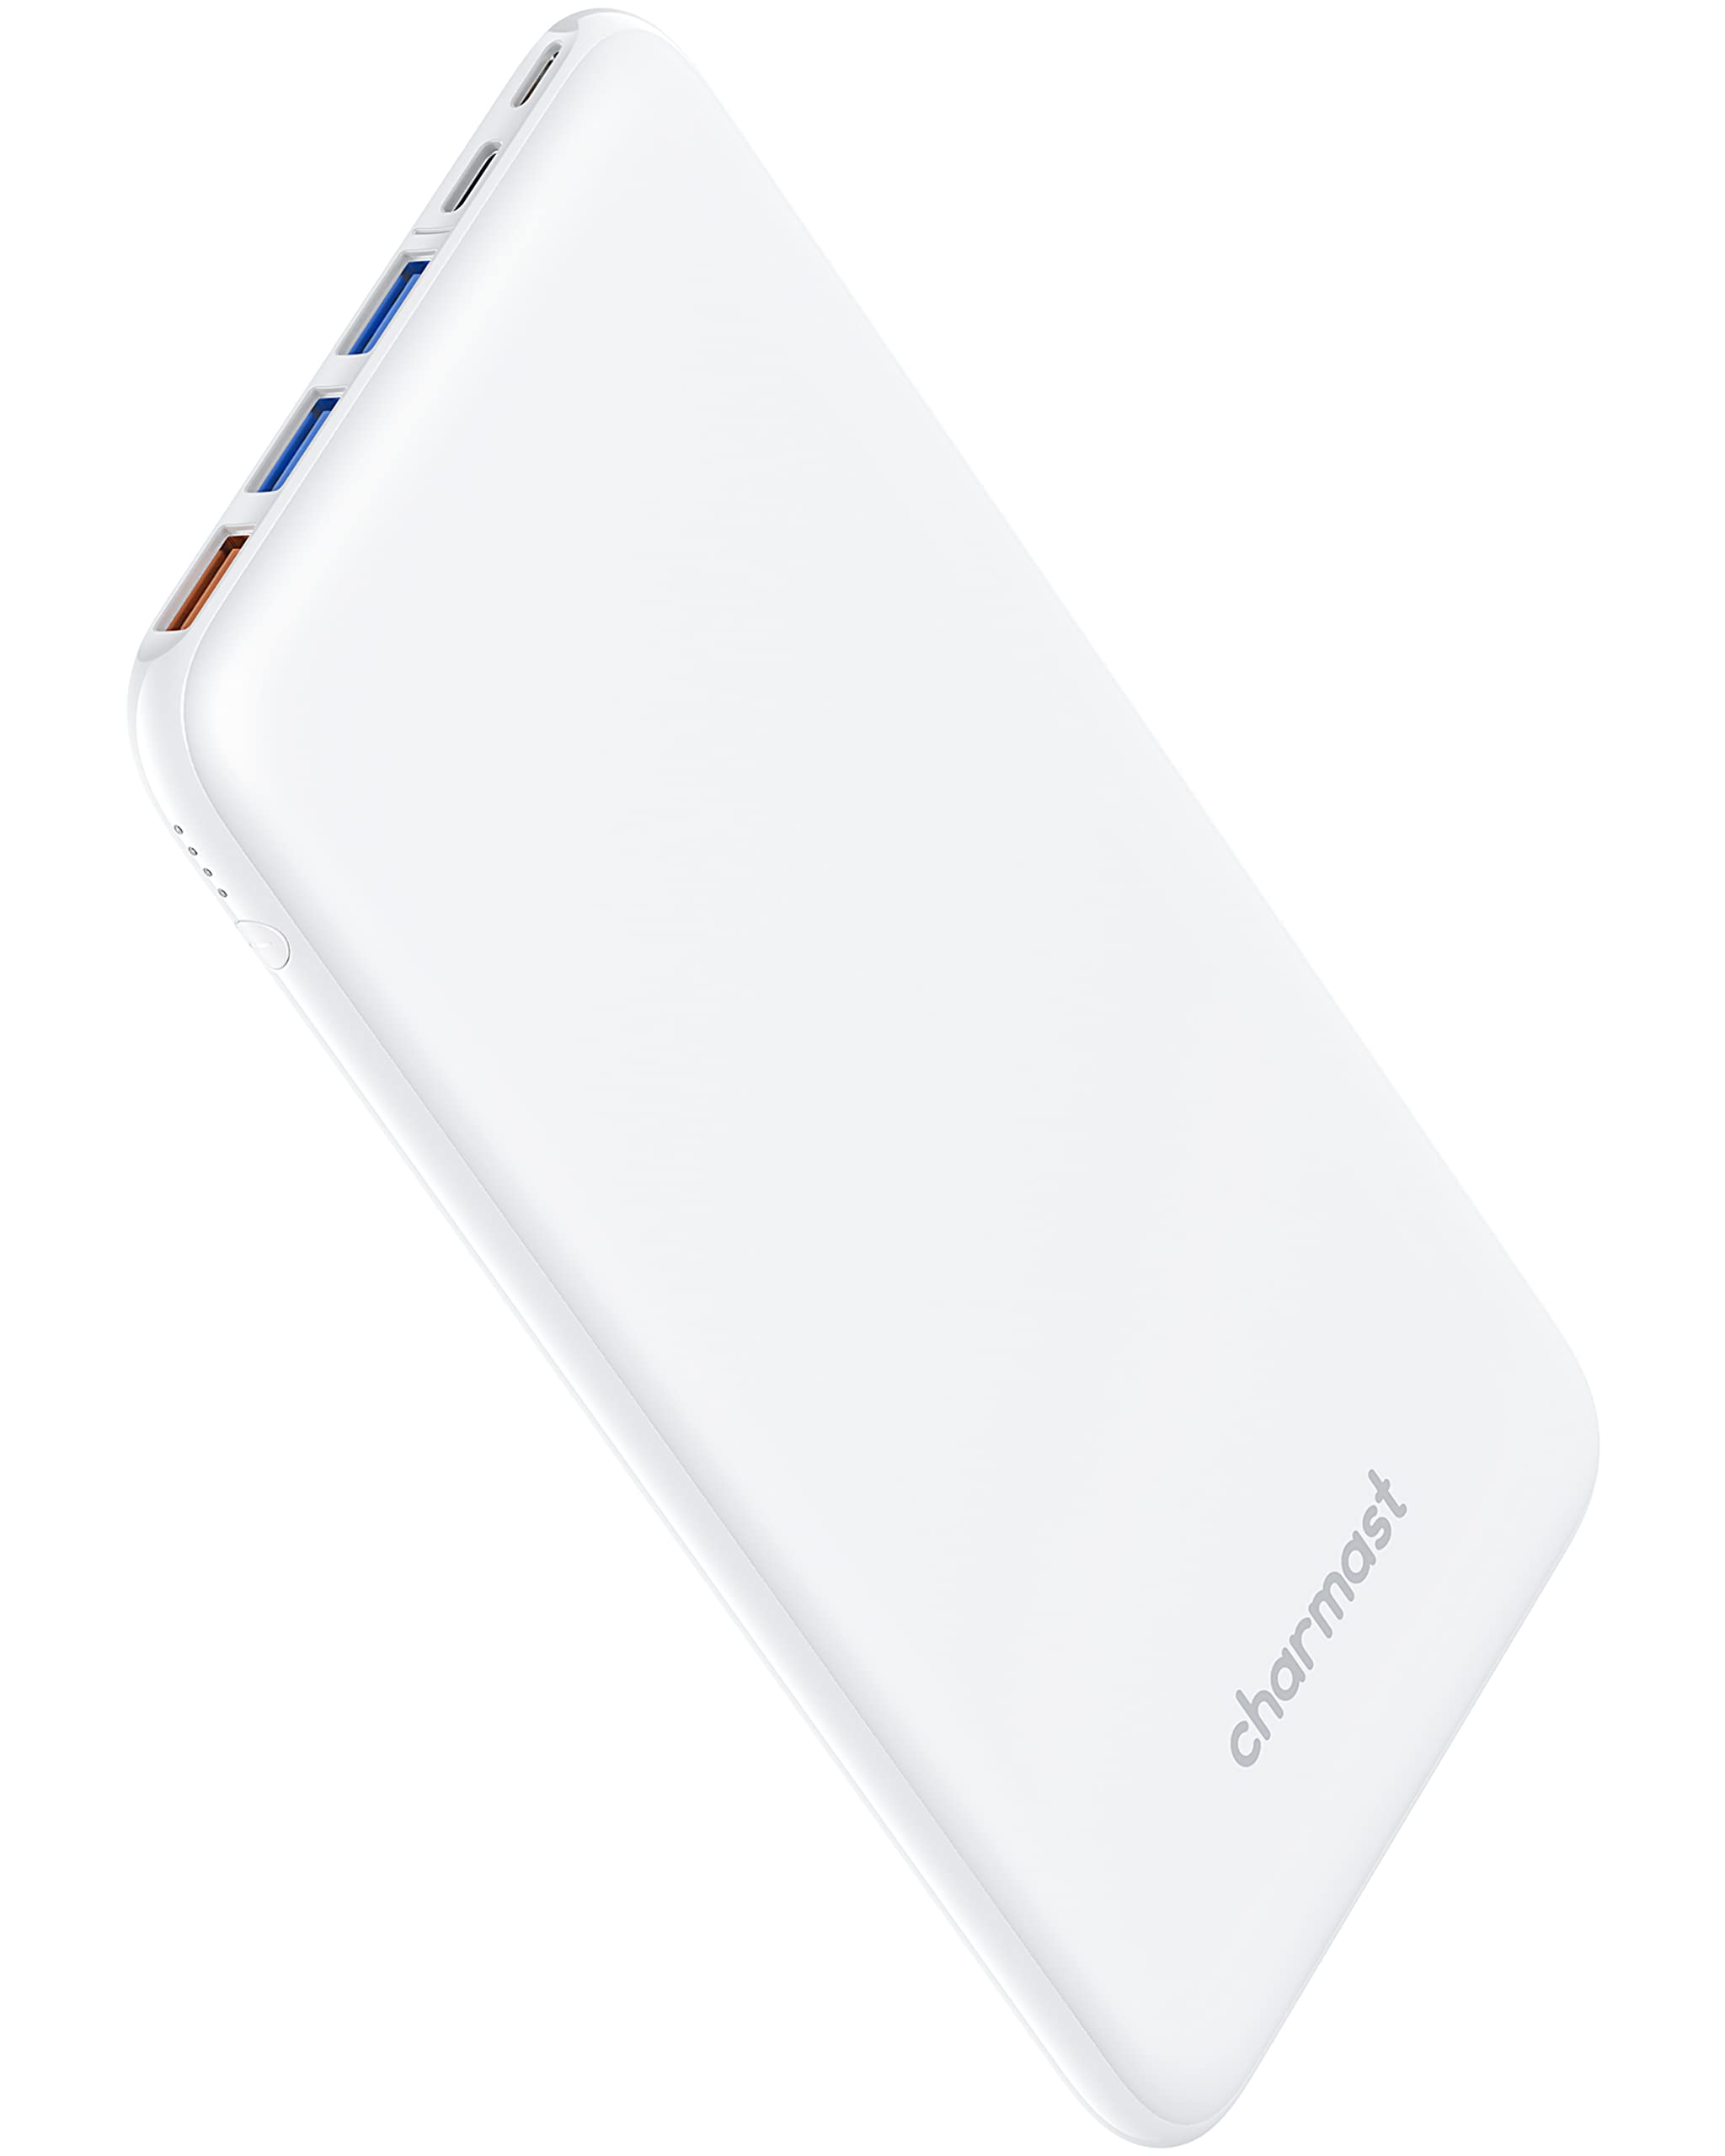 Book Cover Charmast USB C Power Bank, 26800mAh Portable Charger USB C, Slim Thin 3A High-Speed Battery Pack Type C with 3 Input & 4 Output Compatible with iPhone, iPad, Samsung, Pixel More White